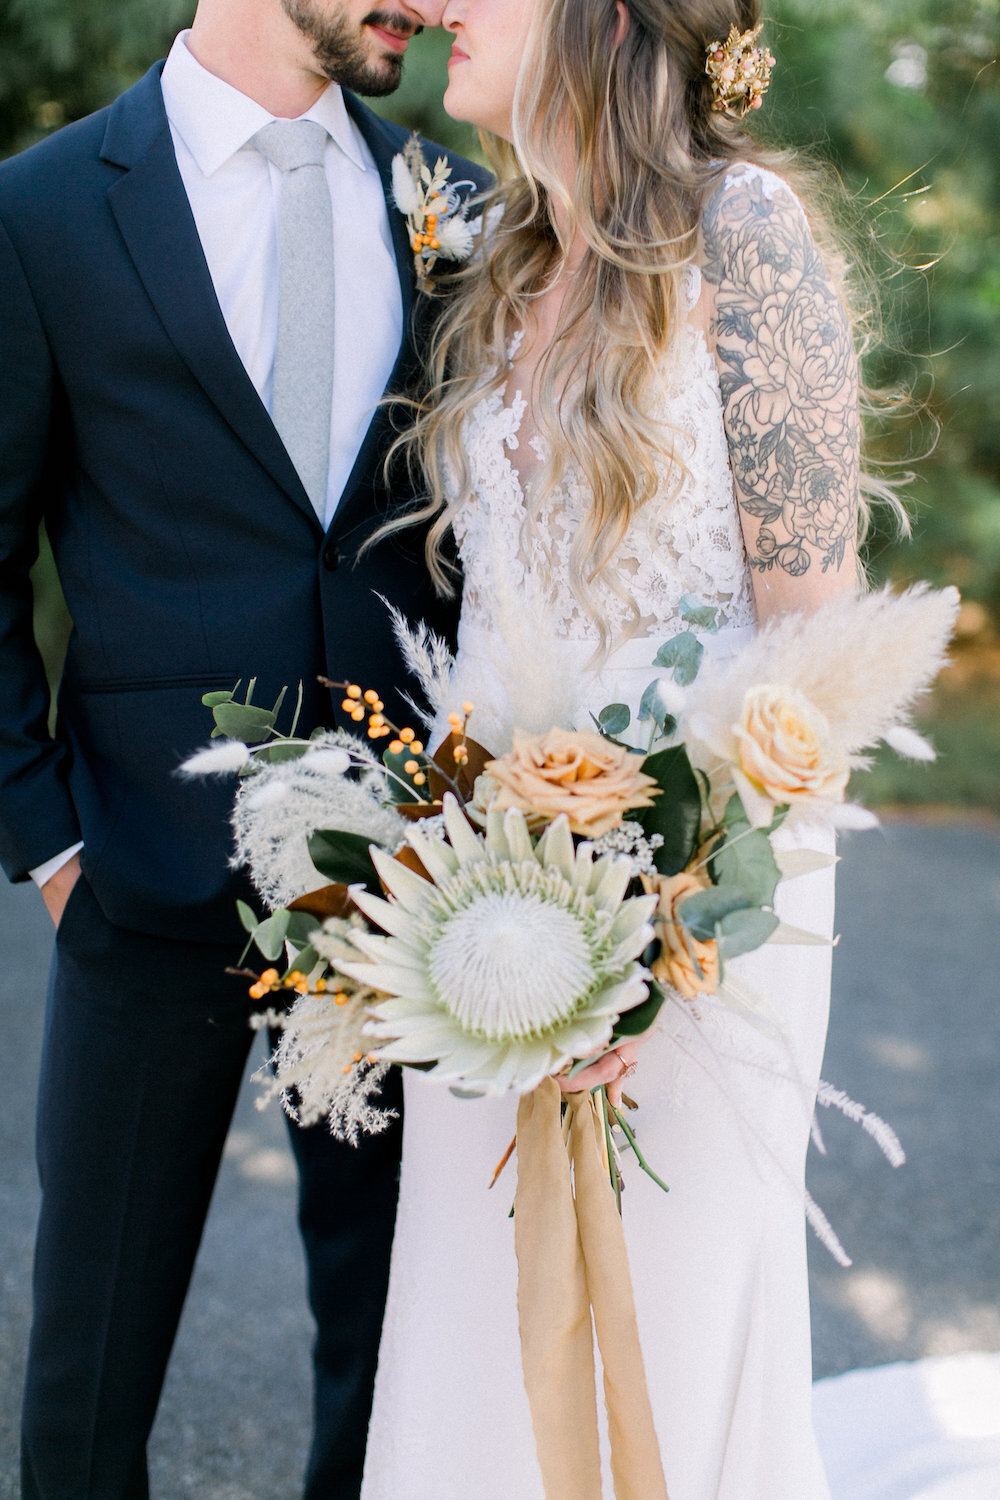 Love & Luster Floral Design protea toffee roses dried flowers wedding bridal bouquet with silk ribbon